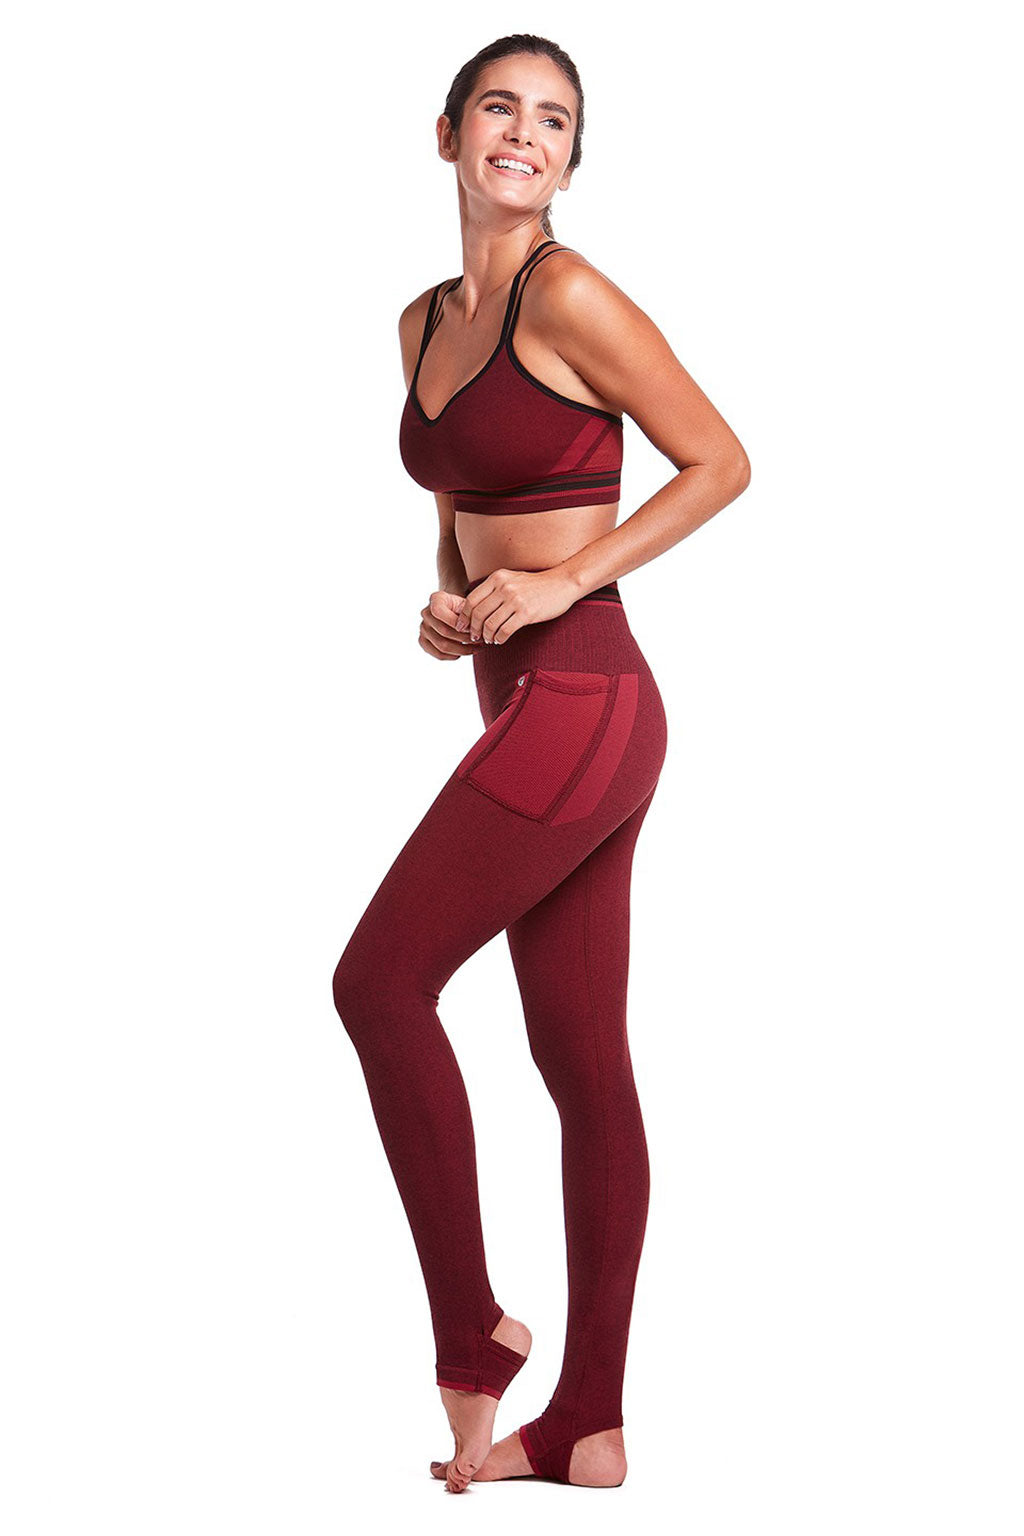 BASIC Fusion style Sport Legging with double and versatile waistband